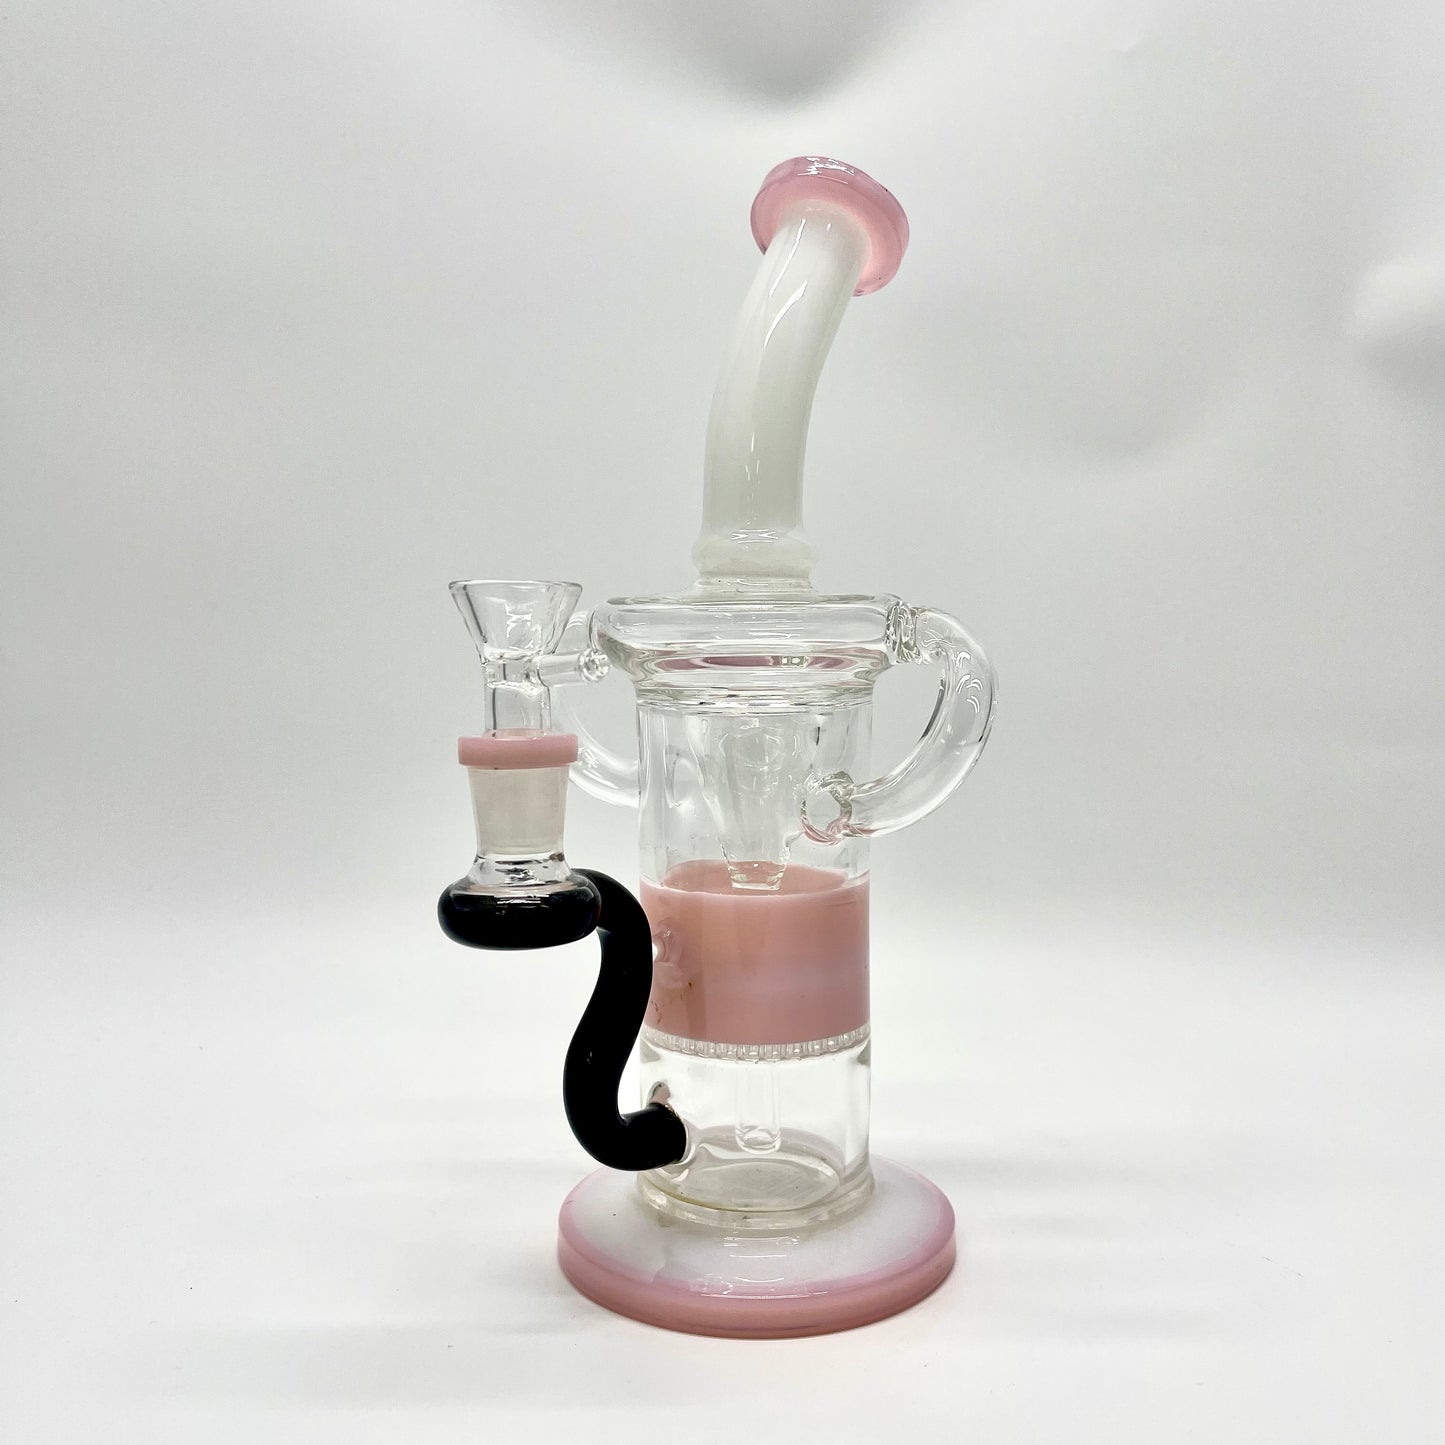 Weedo Medium Glass Bongs (24cm)(Special Edition Only 1 In Stock) pink colour